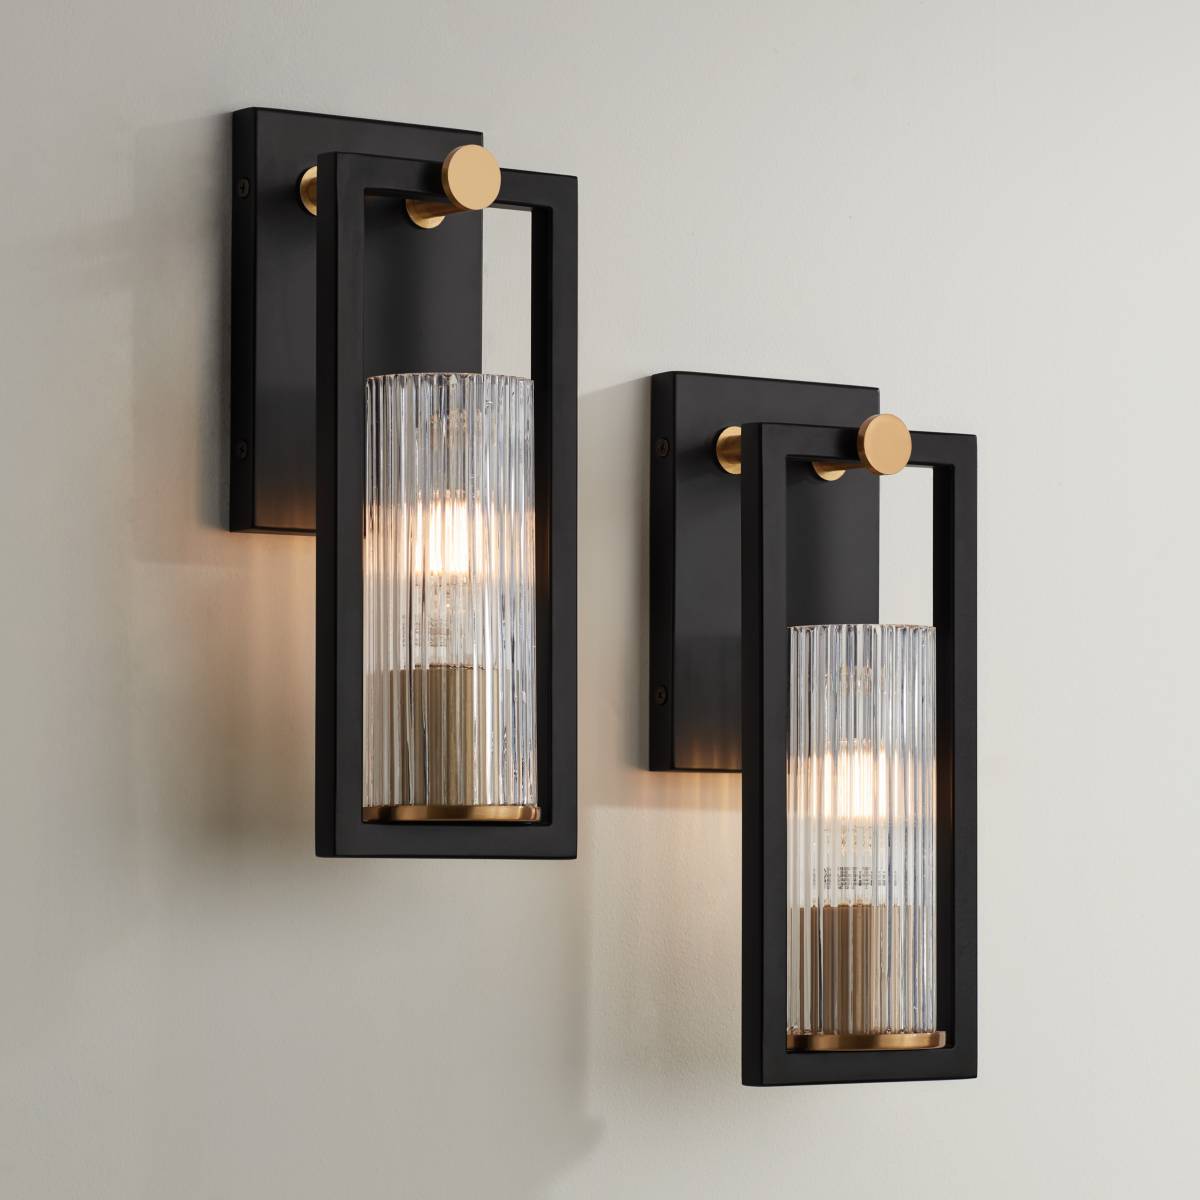 https://image.lampsplus.com/is/image/b9gt8/stiffel-ramos-11-and-one-half-high-black-and-brass-wall-sconces-set-of-2__681v4cropped.jpg?qlt=70&wid=1200&hei=1200&fmt=jpeg